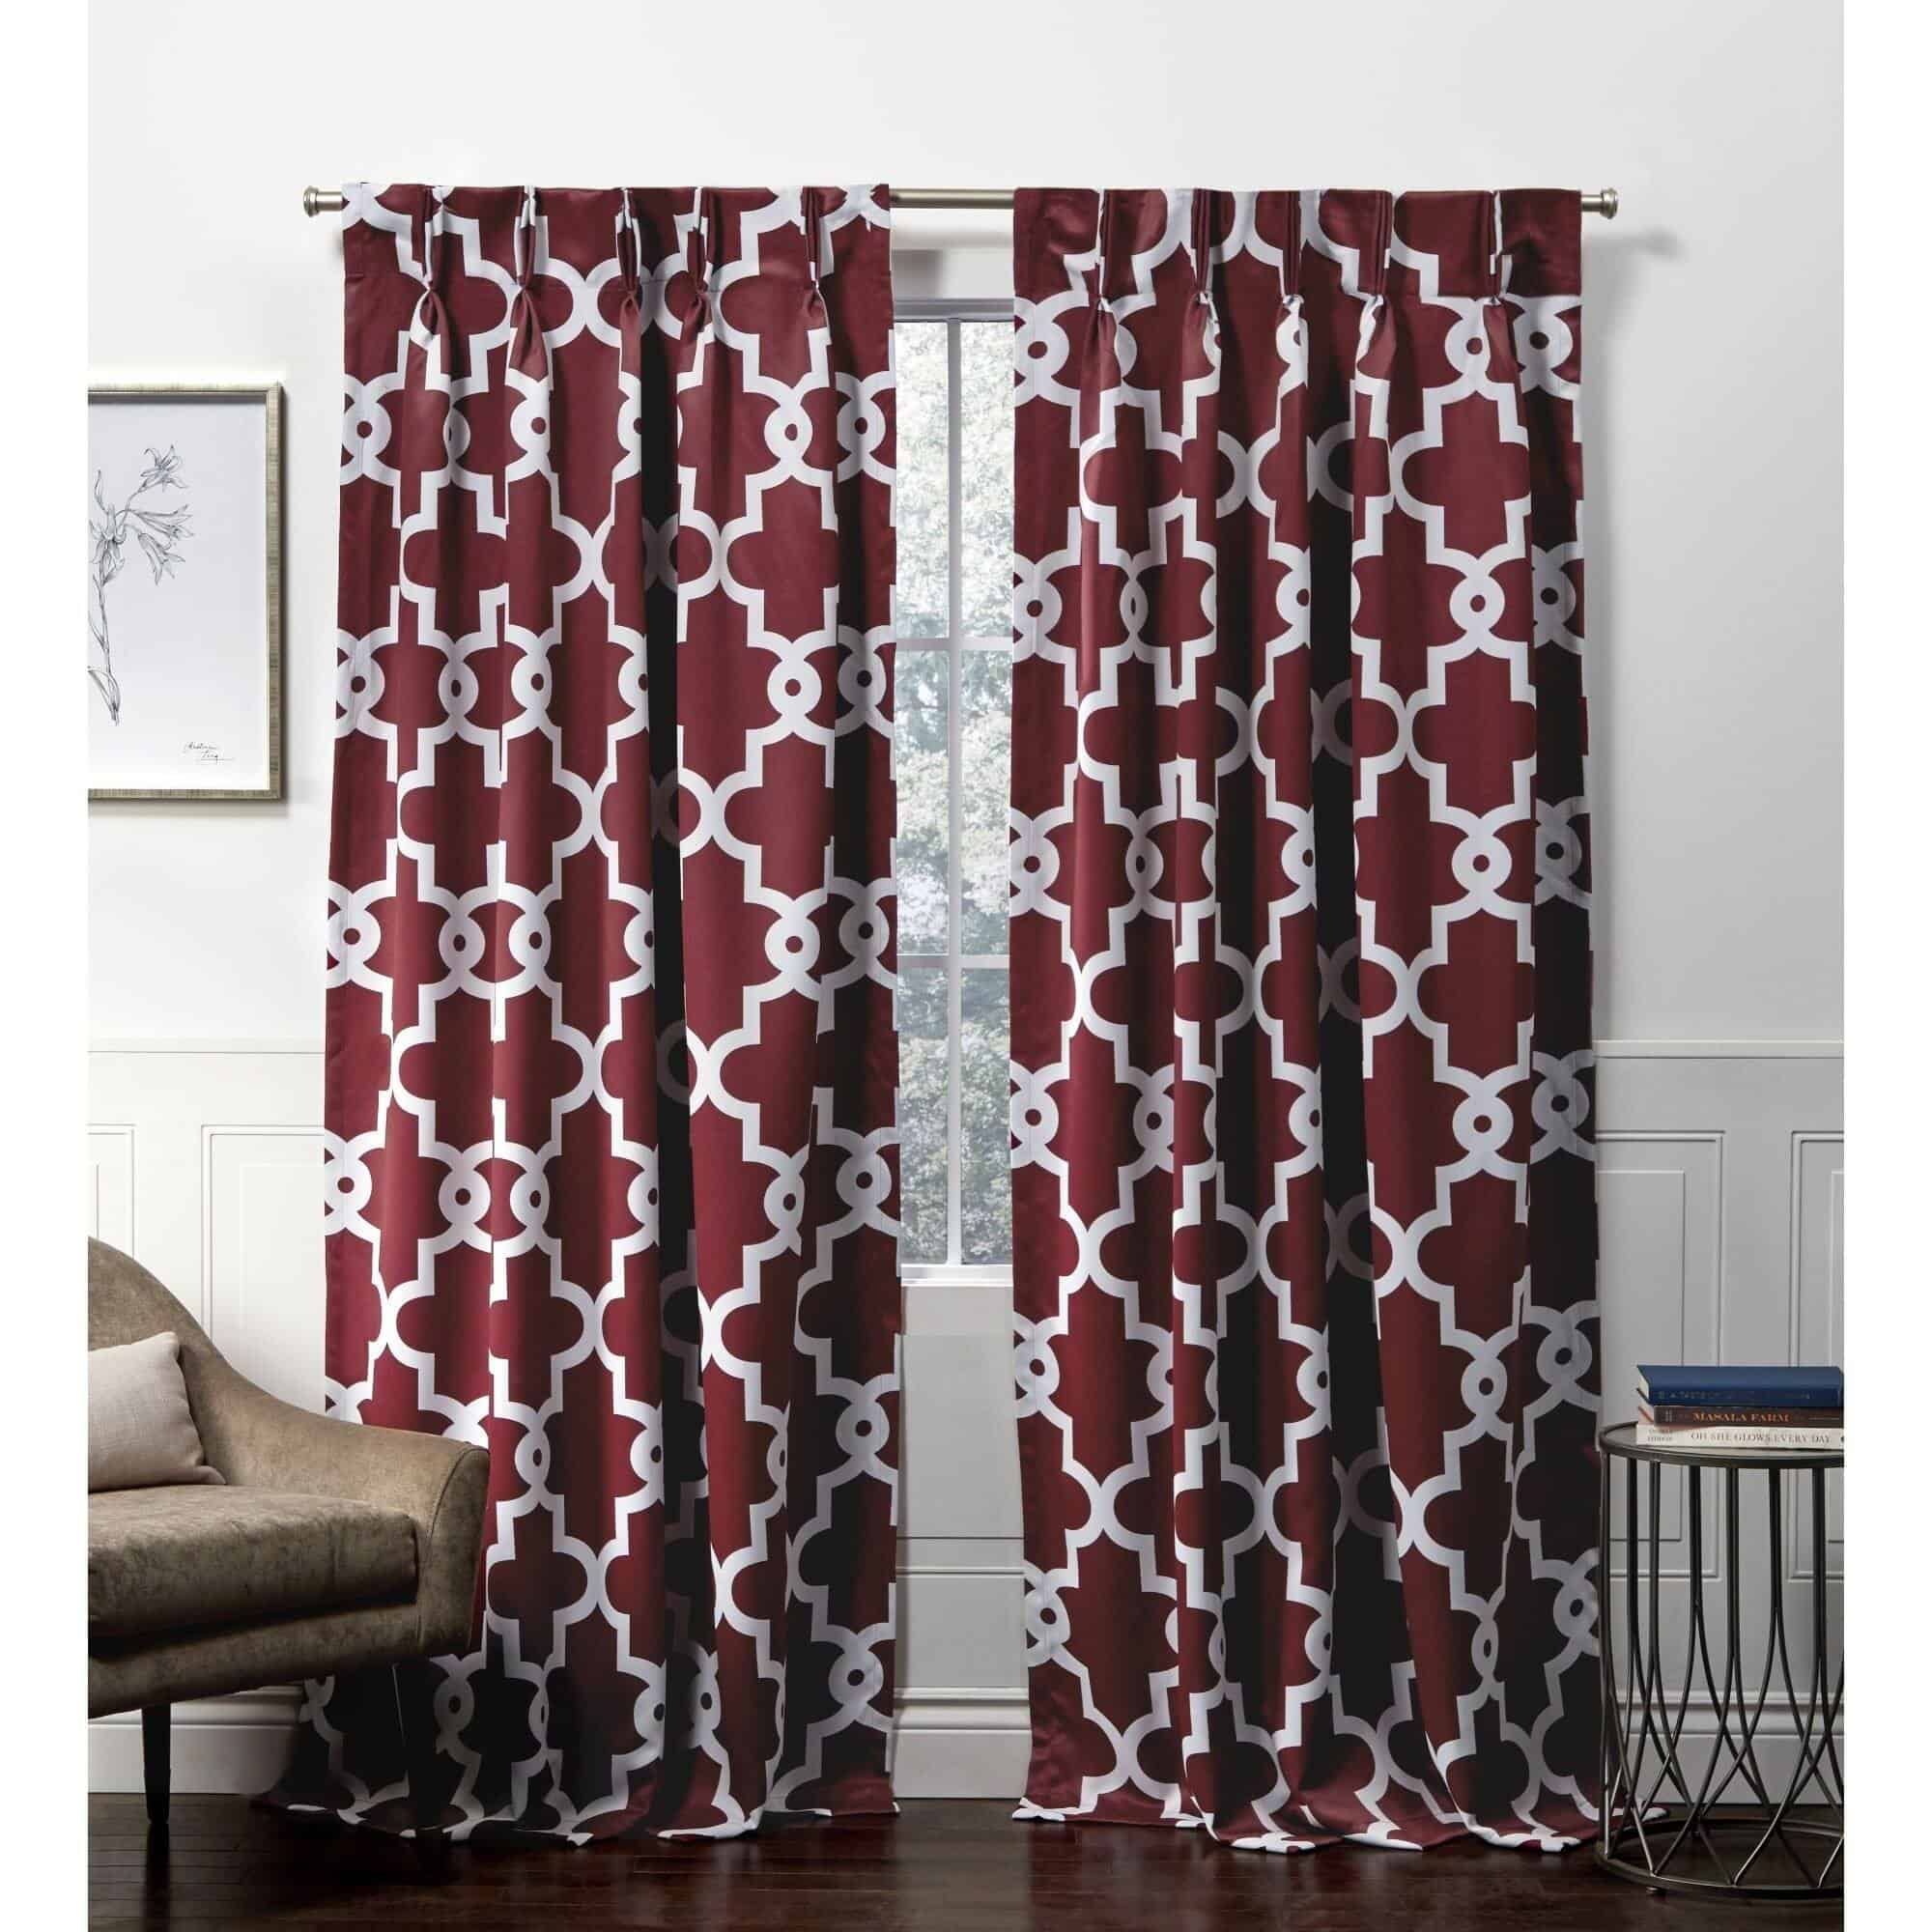 Moroccan Curtains Bring an Elegant And Contemporary Look